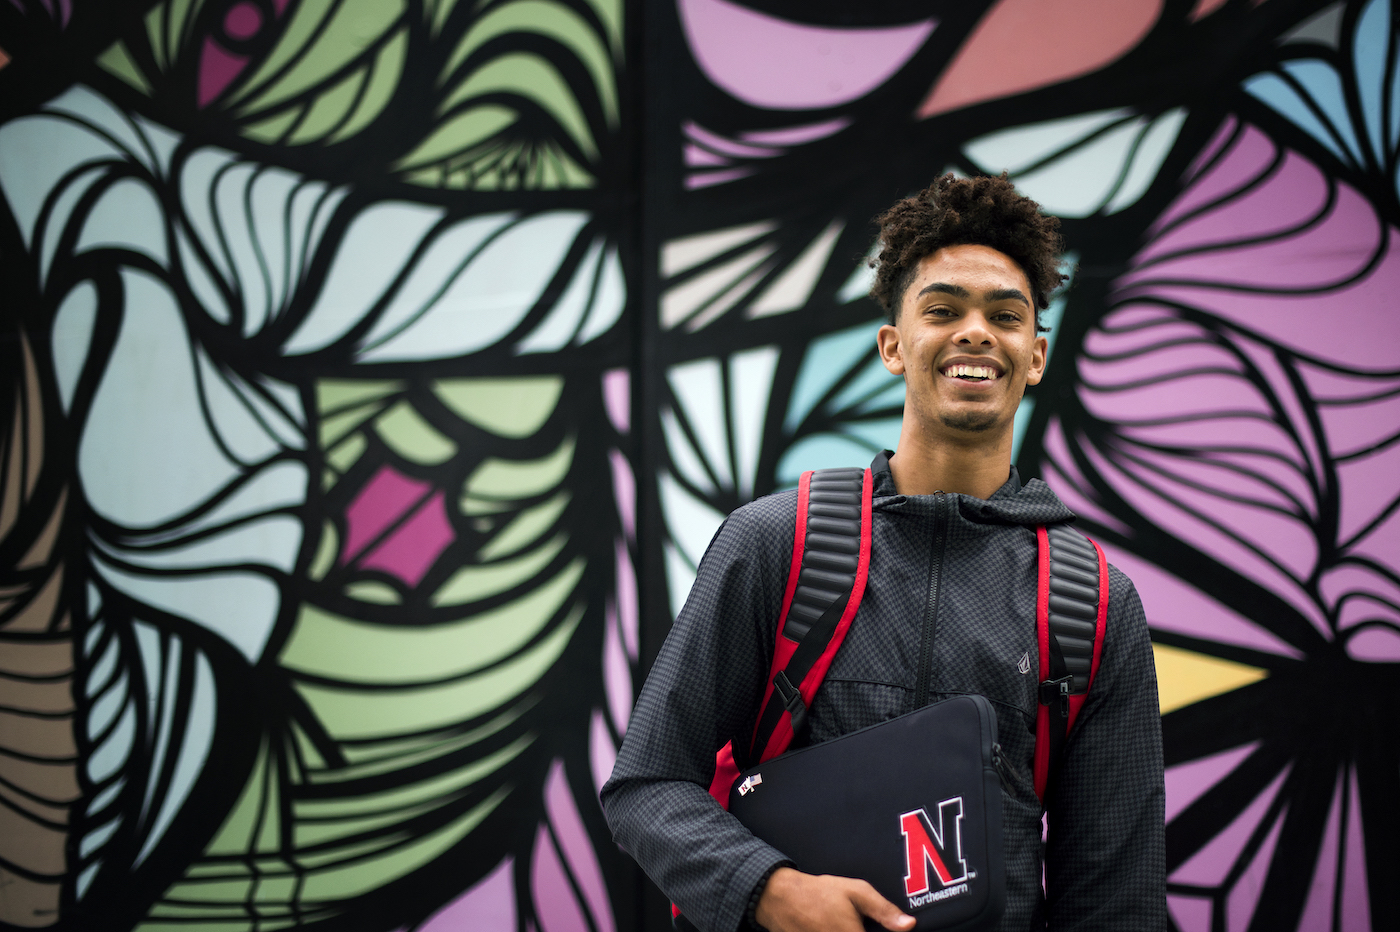 Myles Franklin,'22, poses for a portrait at Northeastern University on Sept. 6, 2017